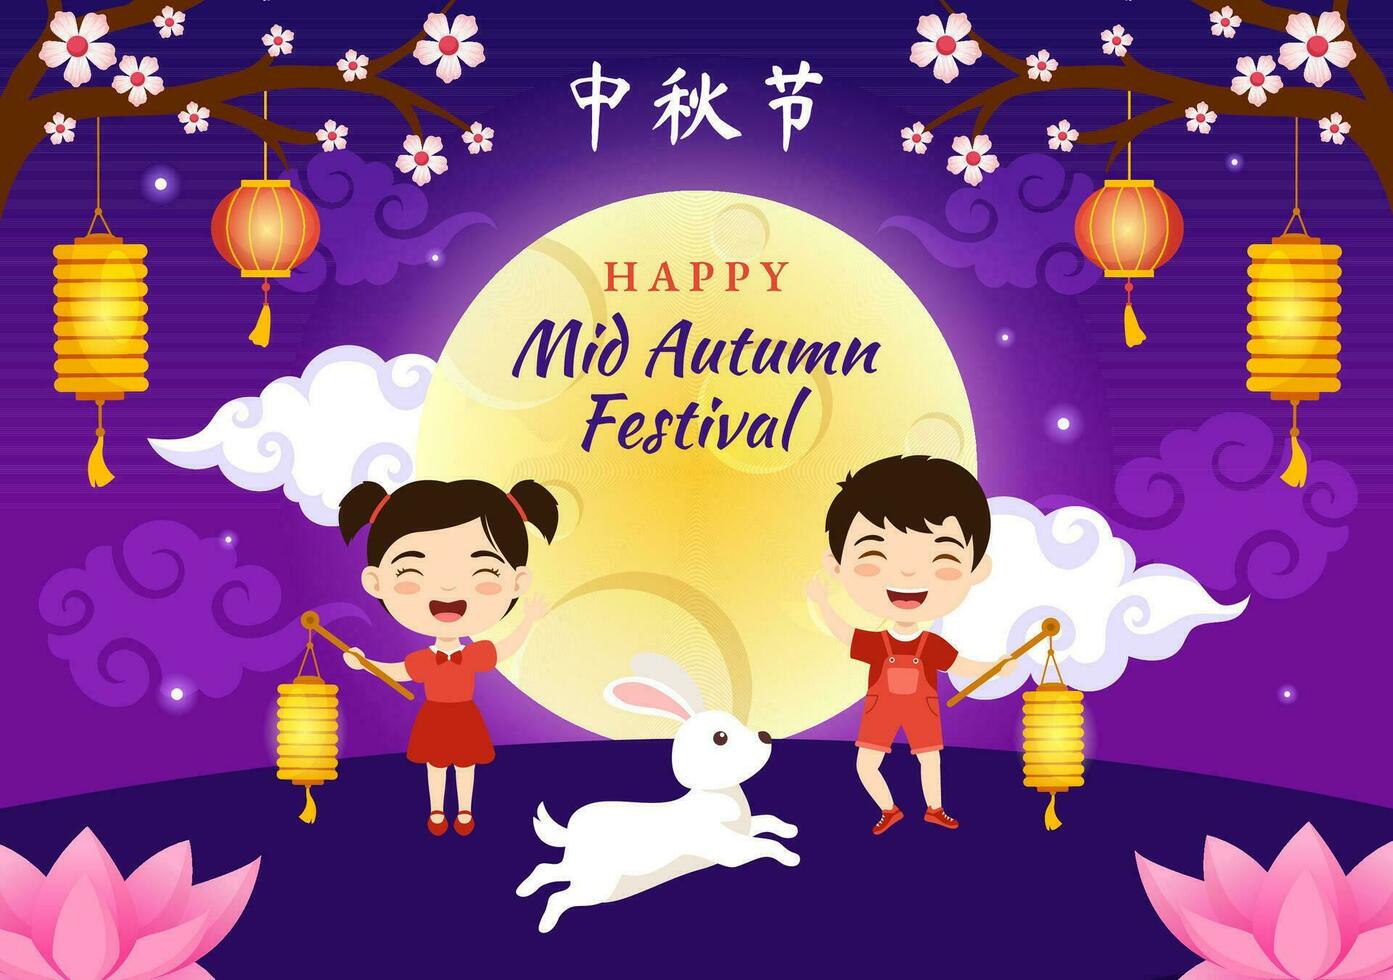 Happy Mid Autumn Festival Vector Illustration with Rabbits Carrying Lanterns and Enjoy Mooncake Celebrate on the Night of the Full Moon Templates